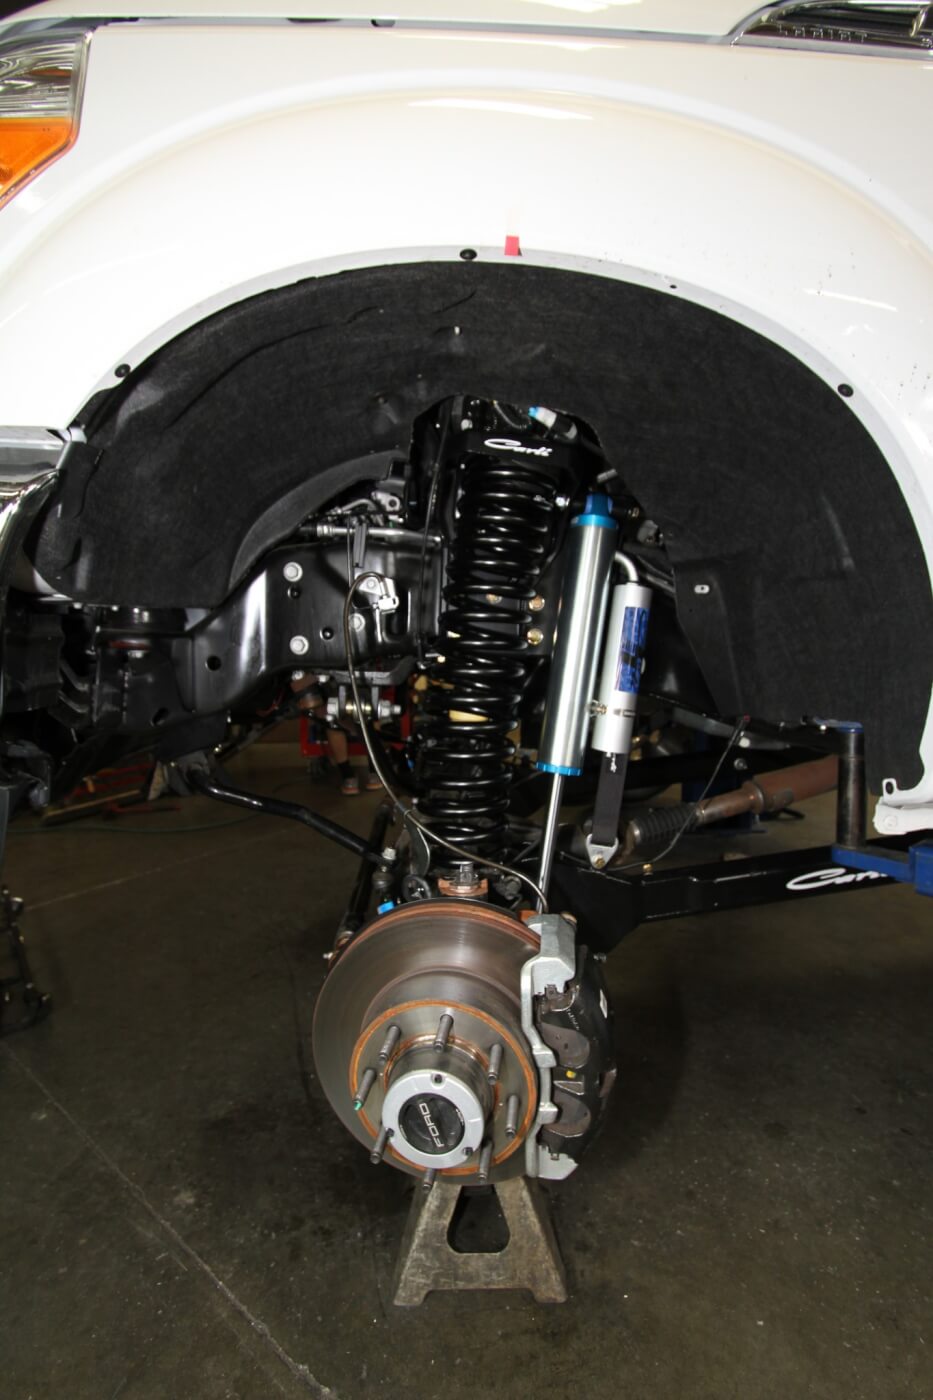 9. Here you see the completed front installation of the Carli 3.0 Dominator kit on our Ford F-250. It’s a clean, rugged and functional system that is far superior to the stock setup for ride quality, height and added travel for rutted roads and trail.